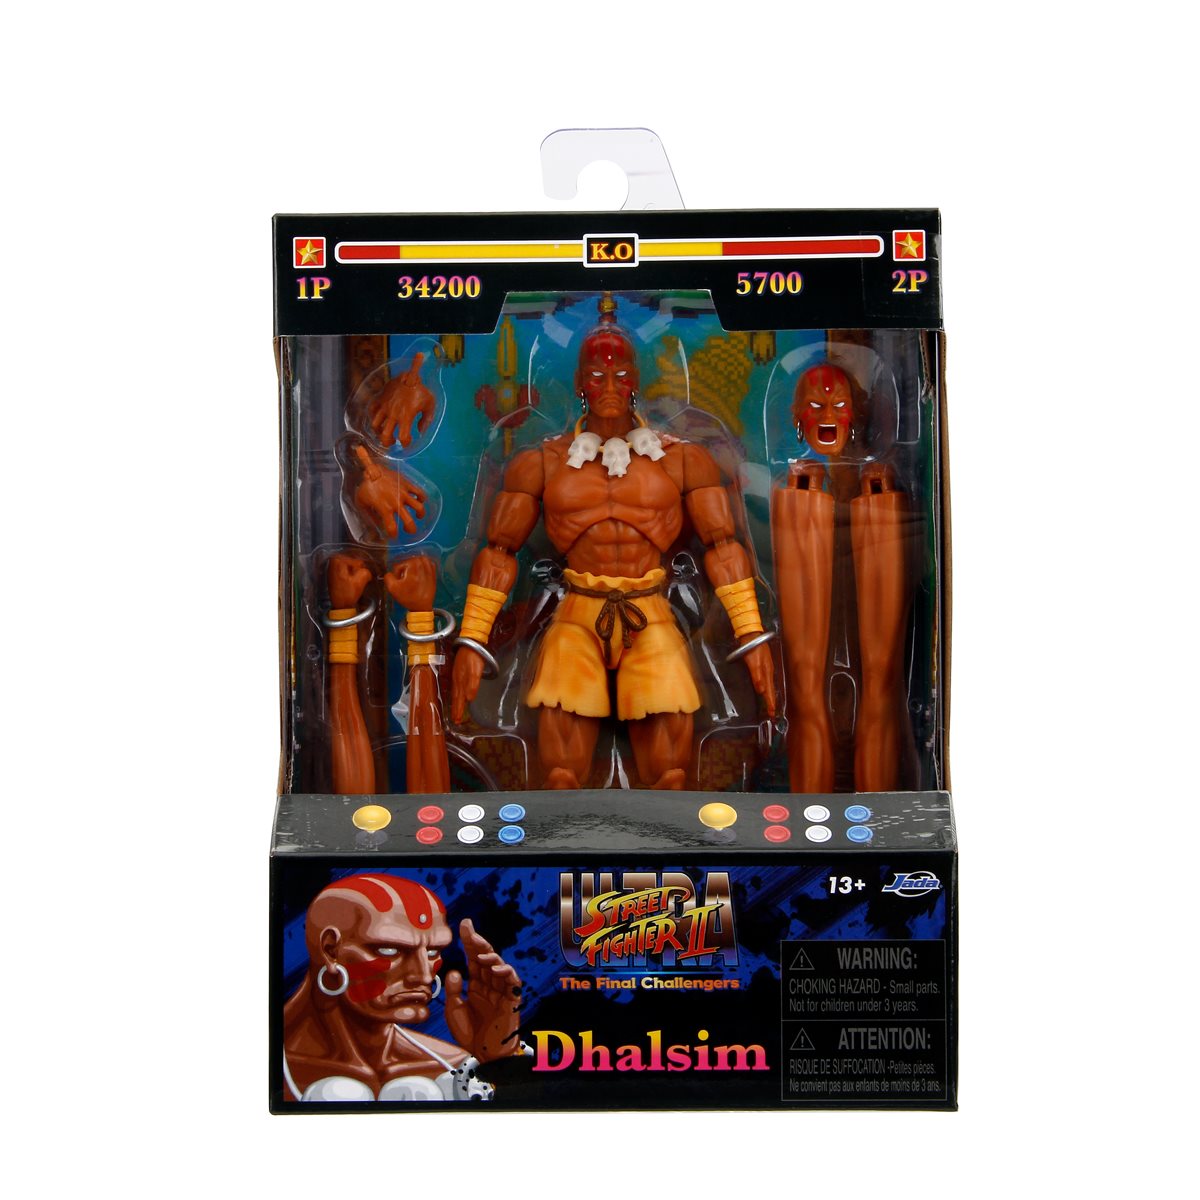 Ultra Street Fighter II Dhalsim 6-Inch Scale Action Figure by Jada Toys